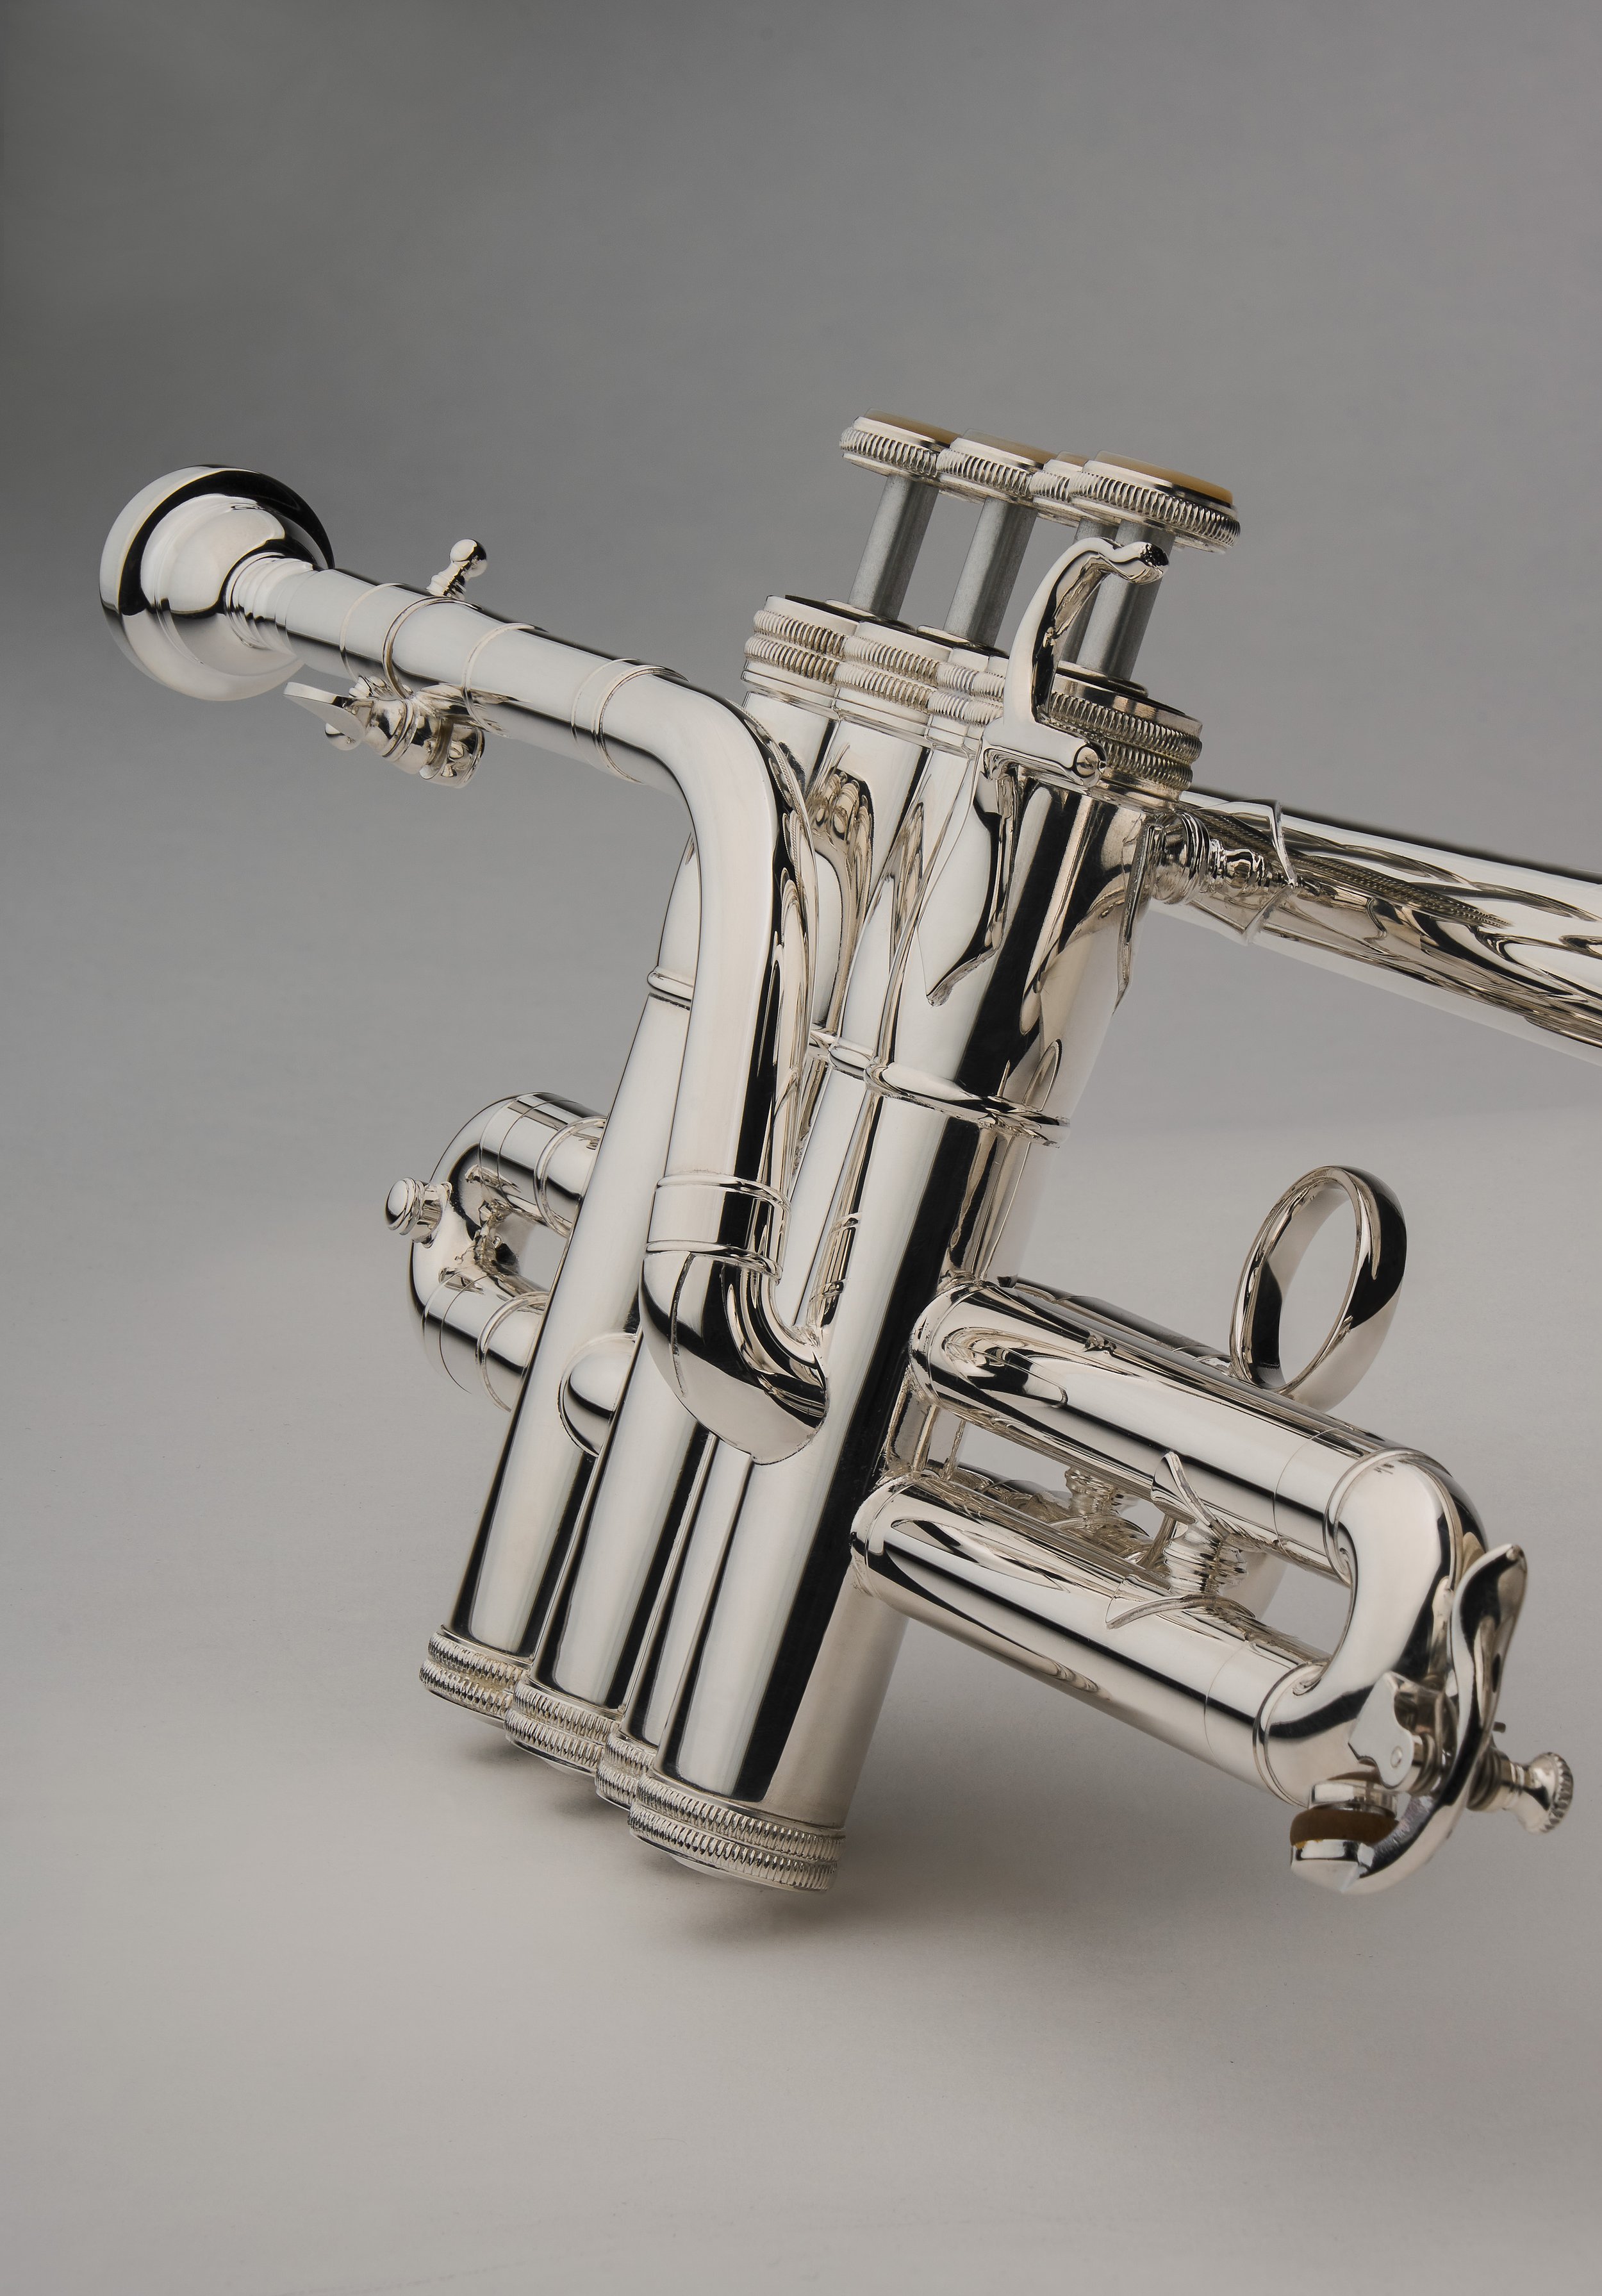 Shires_Trumpet_TRQ9S_Piccolo_StackedComposite_Beauty_0122.jpg